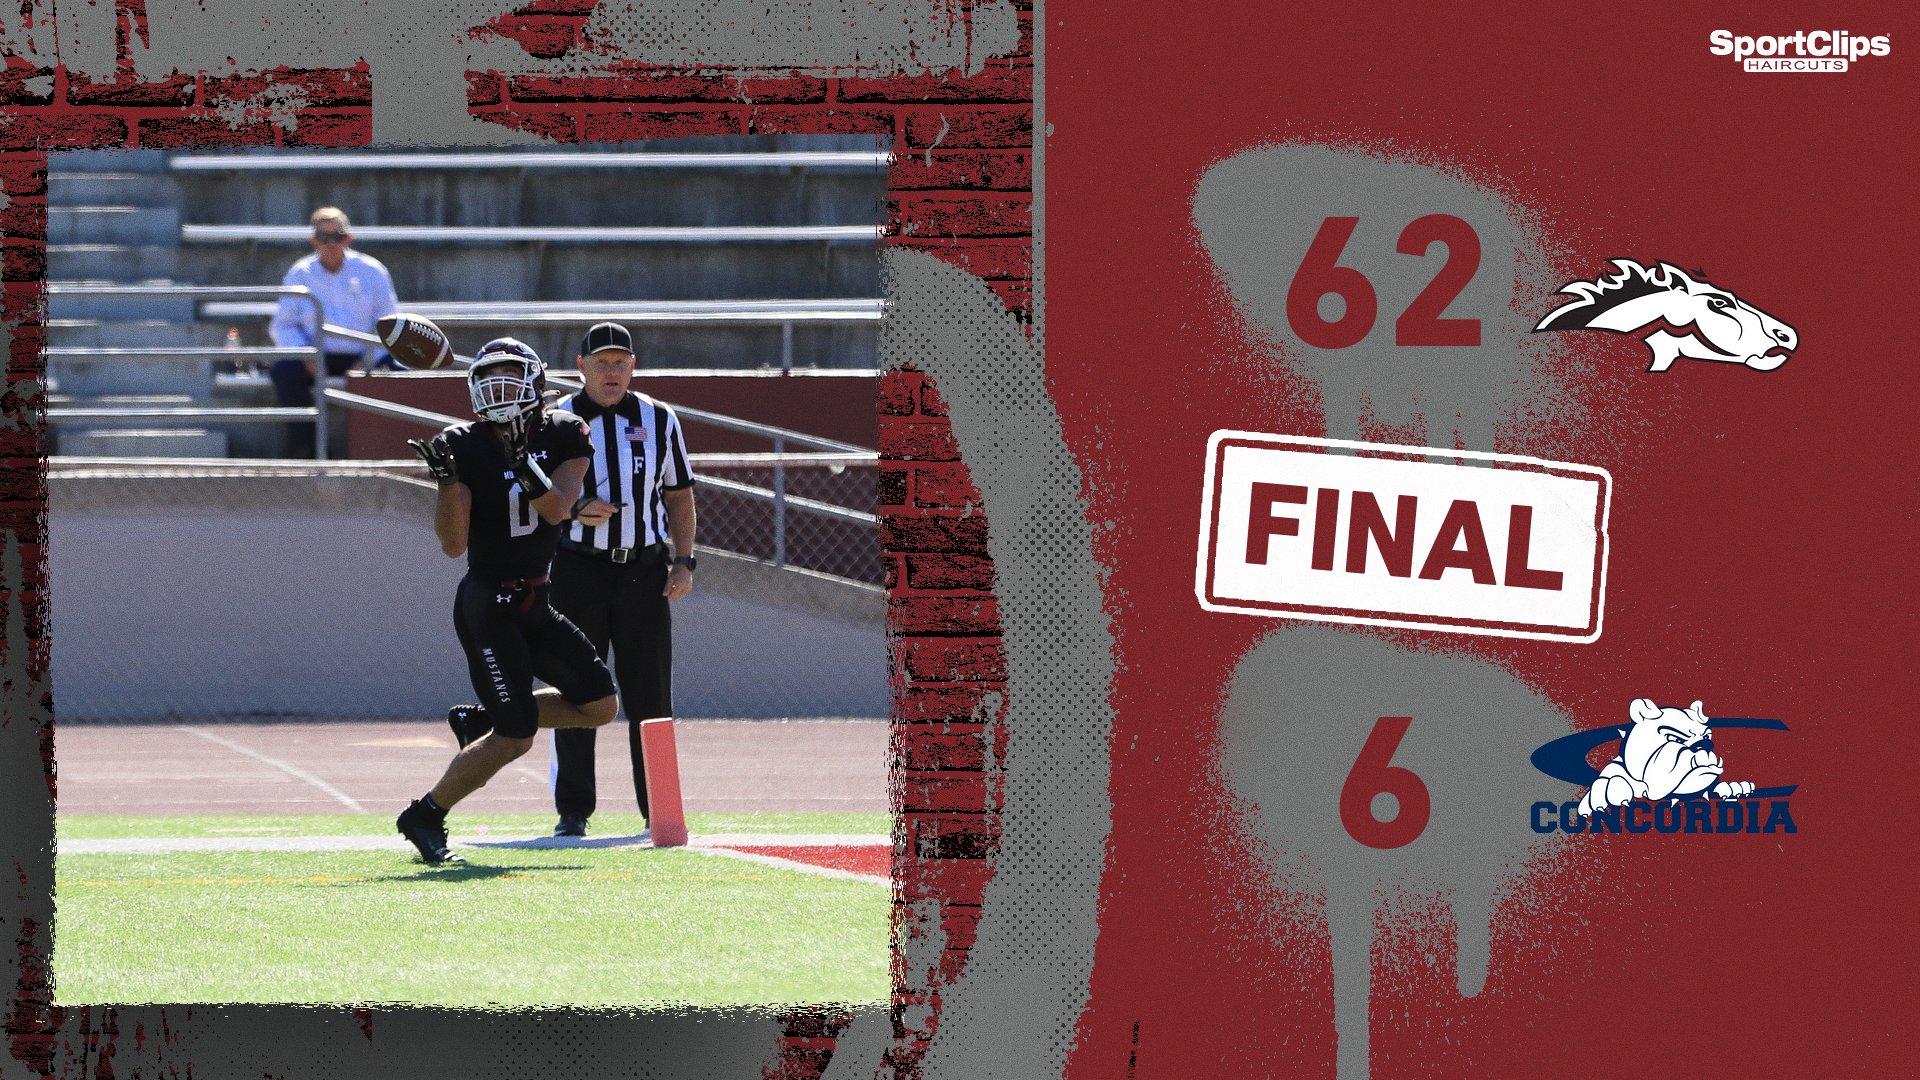 Five passing touchdowns guide Morningside to a homecoming victory